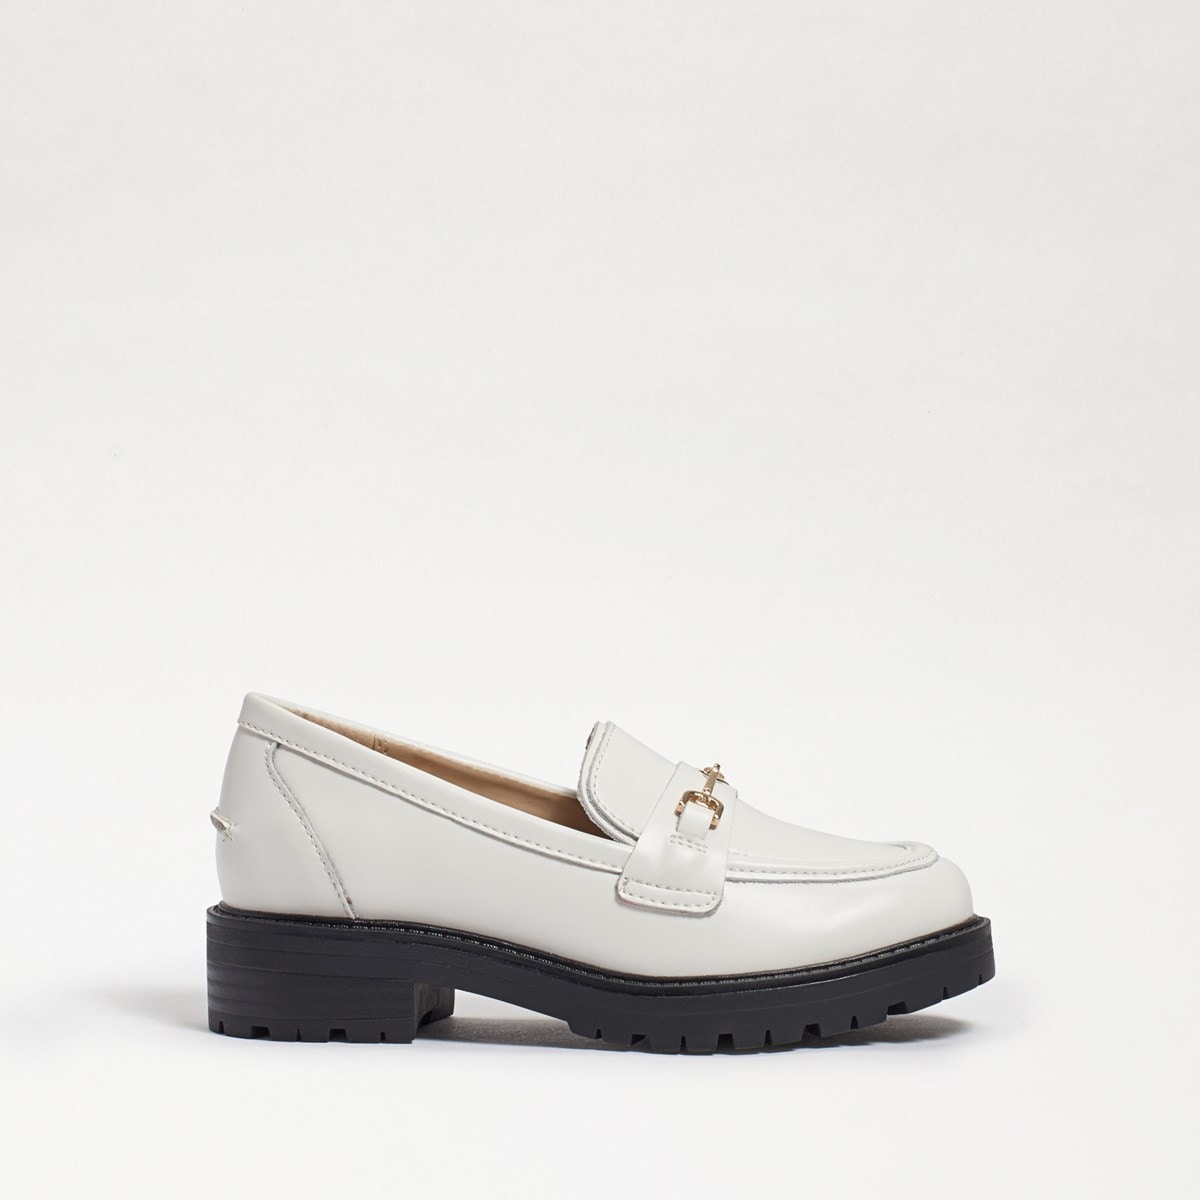 Sam Edelman Tully Kids Loafer | Girls' Flats and Loafers